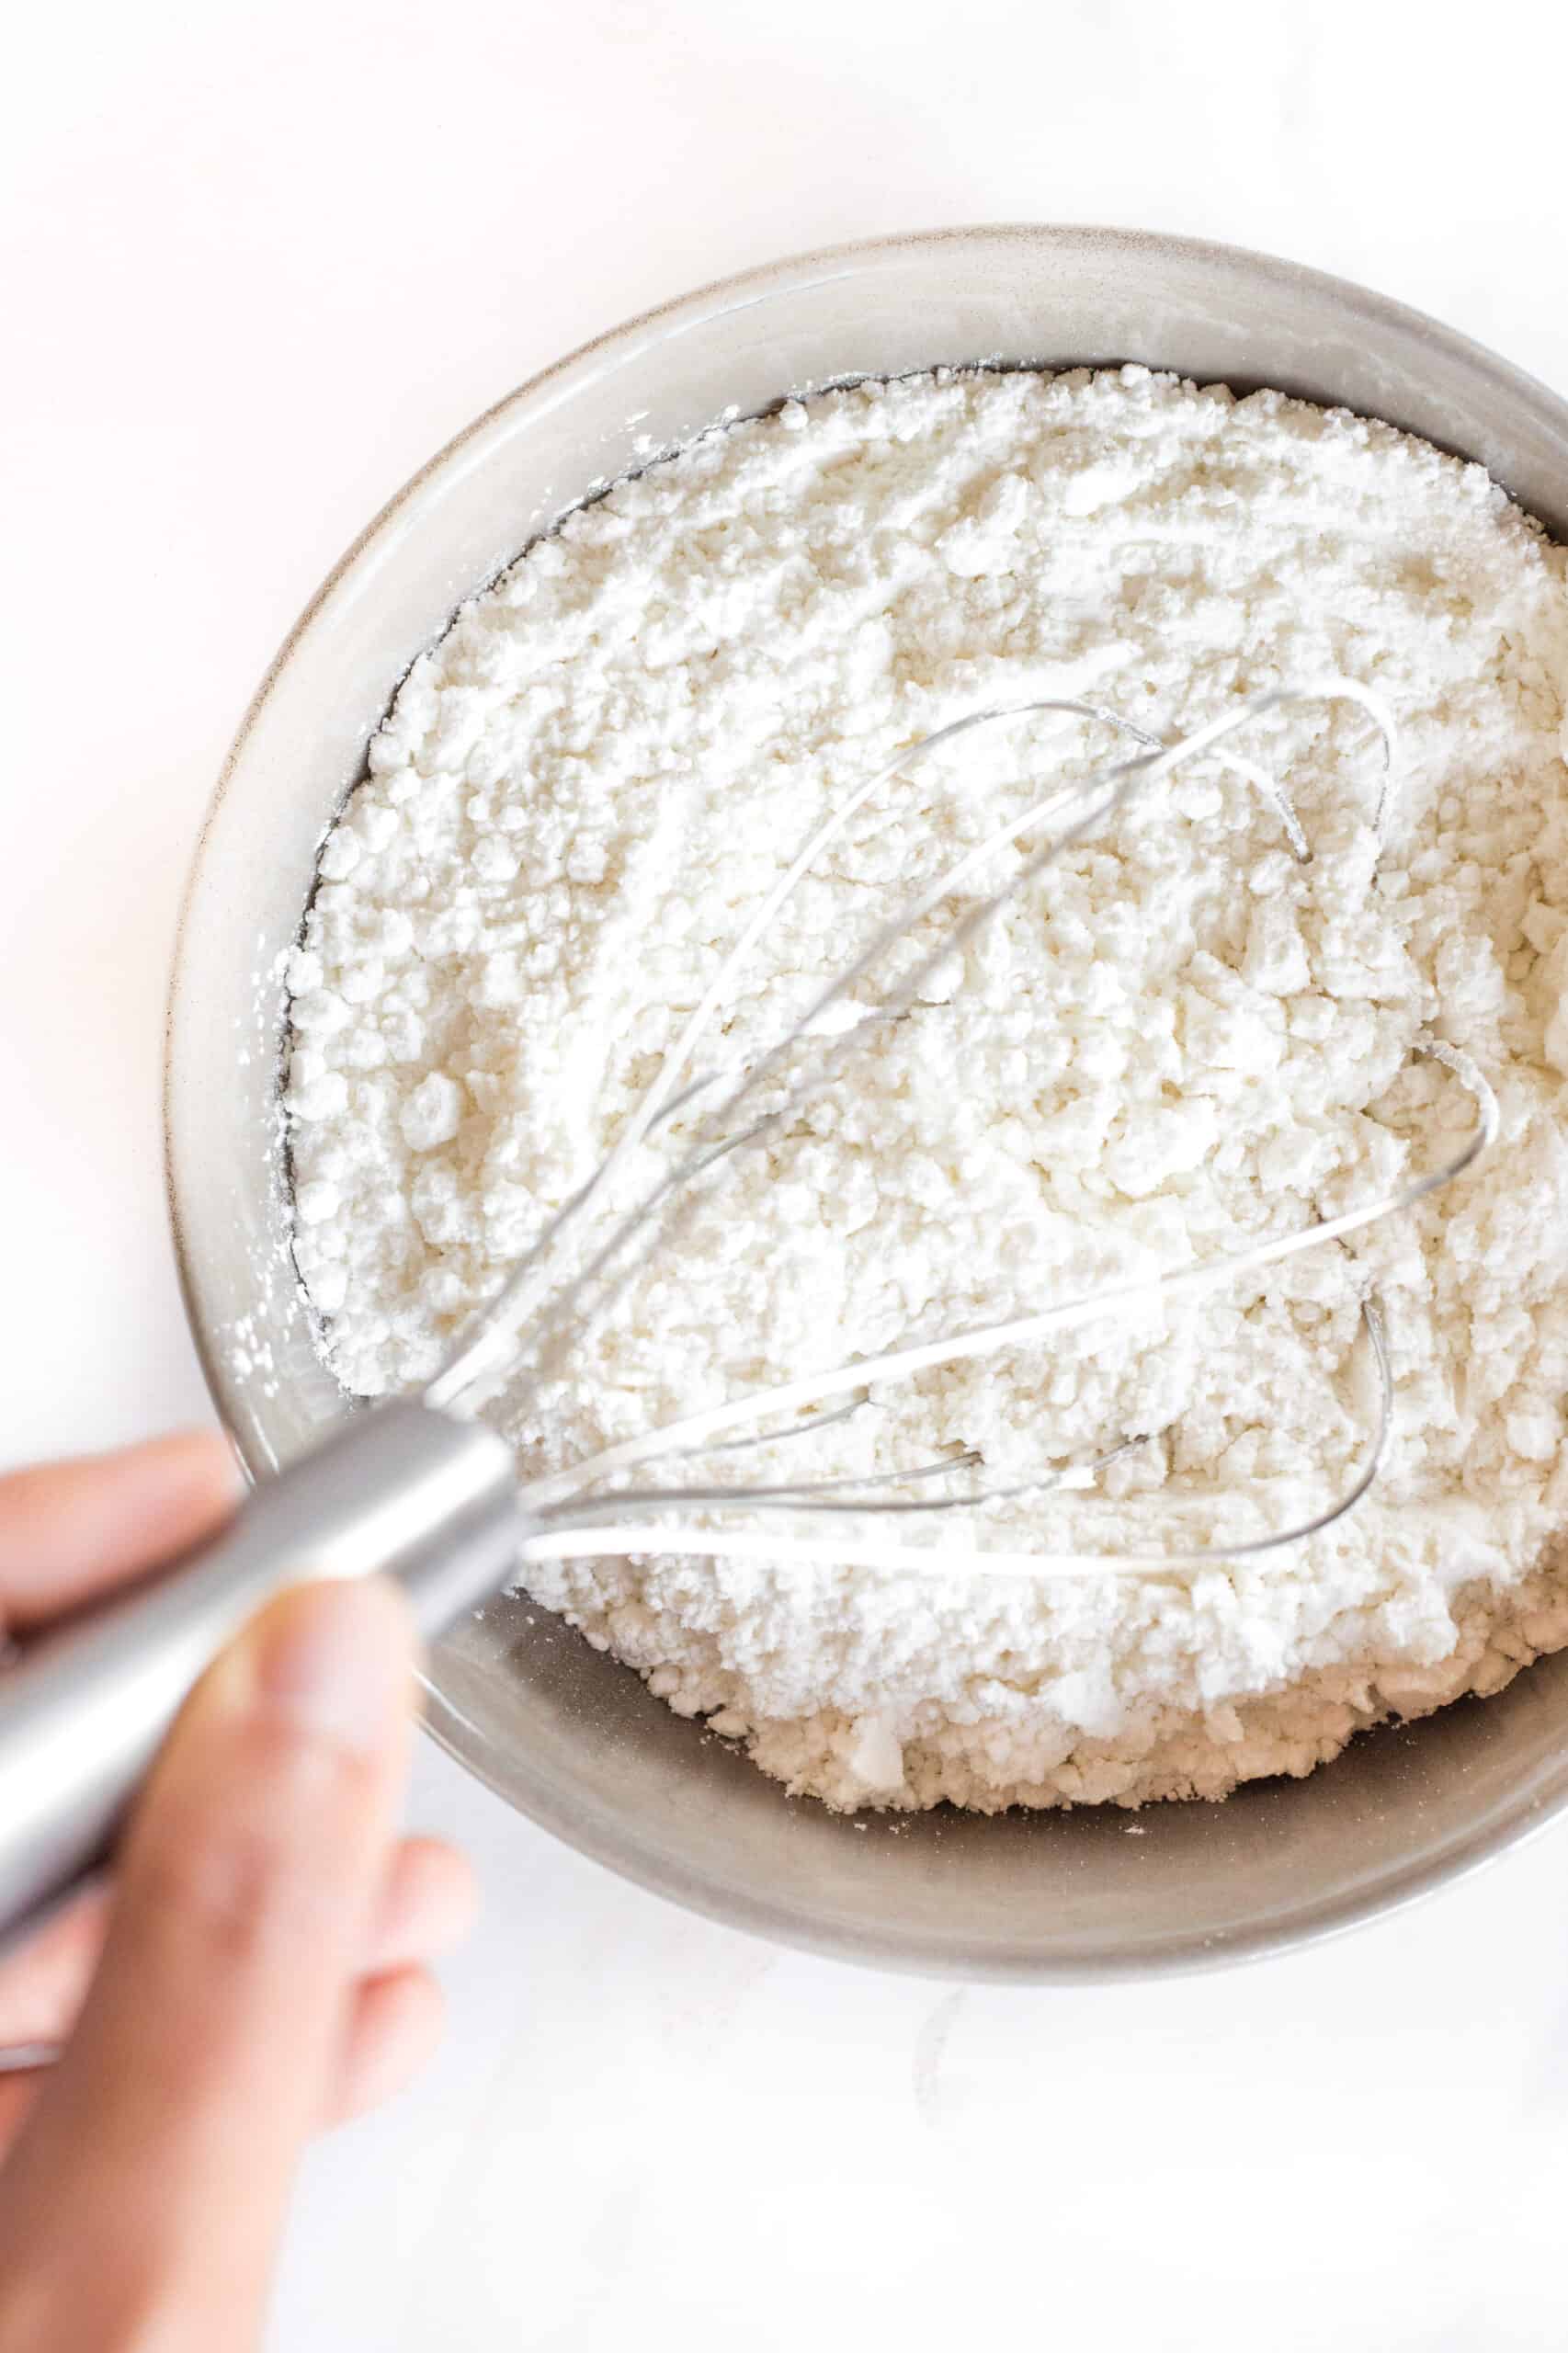 Whisking flour in a grey bowl.